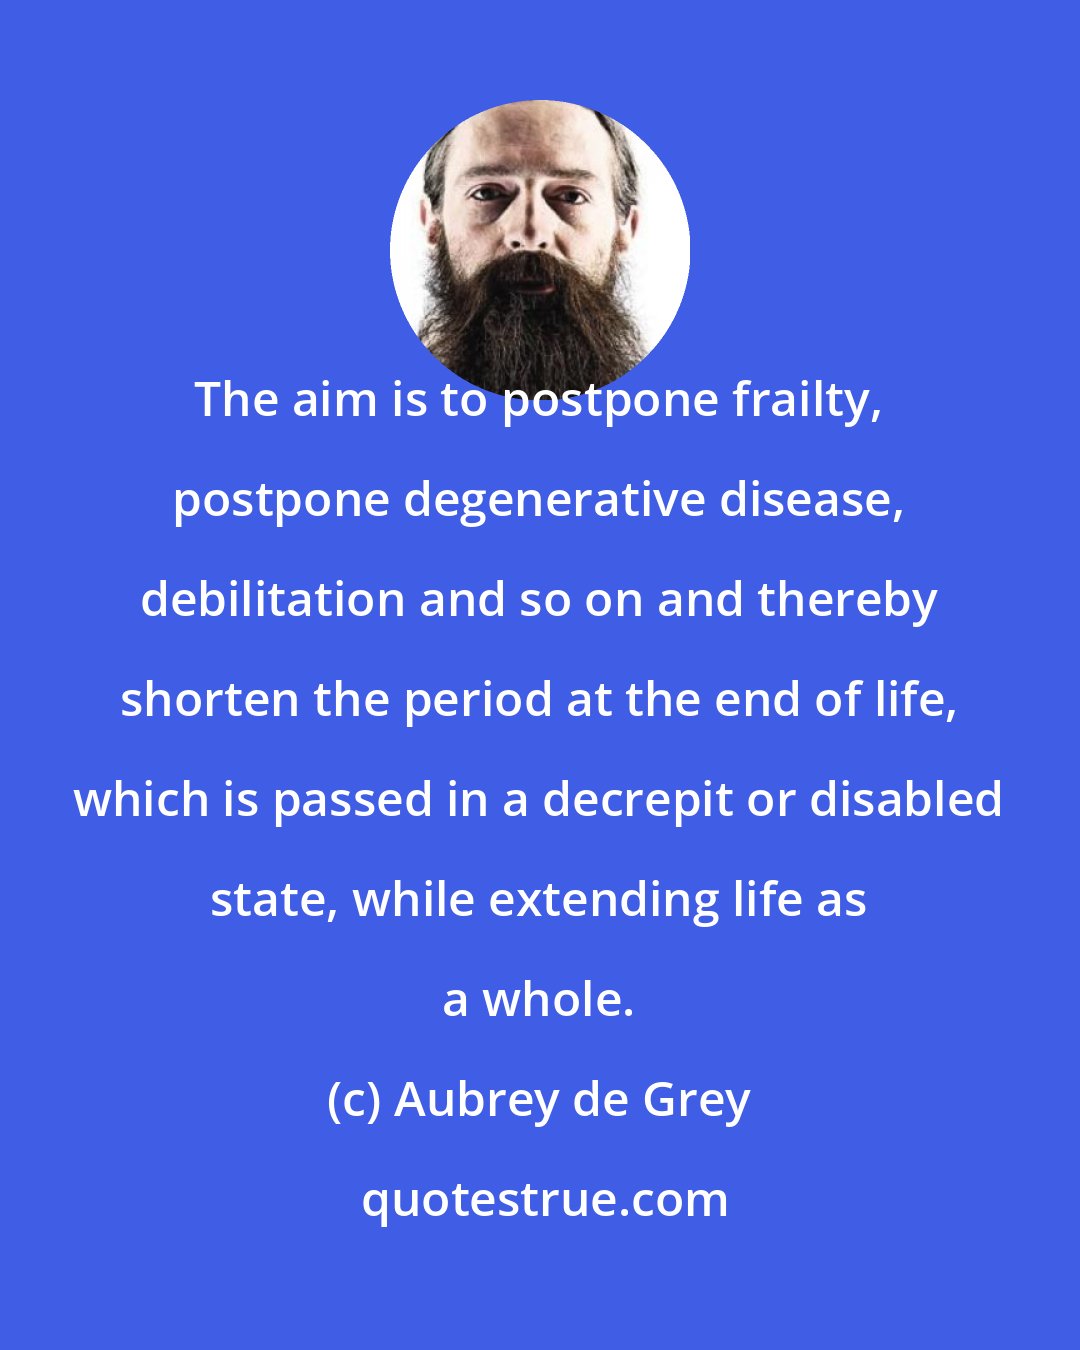 Aubrey de Grey: The aim is to postpone frailty, postpone degenerative disease, debilitation and so on and thereby shorten the period at the end of life, which is passed in a decrepit or disabled state, while extending life as a whole.